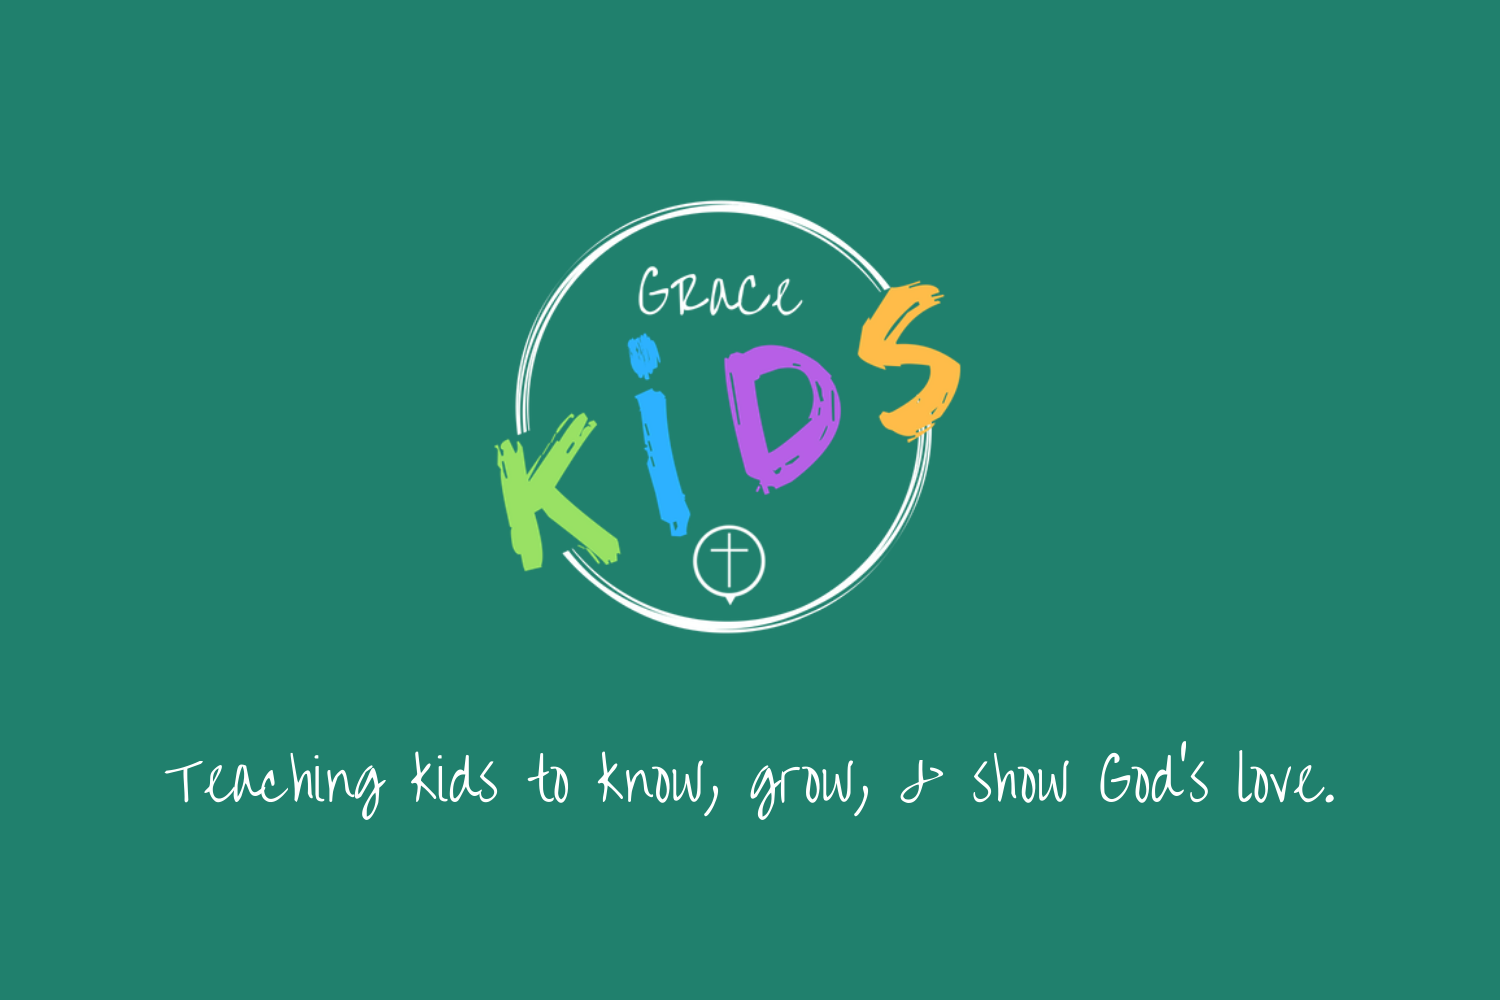 Copy of Teaching kids to know, grow, & show God's love. (1).png